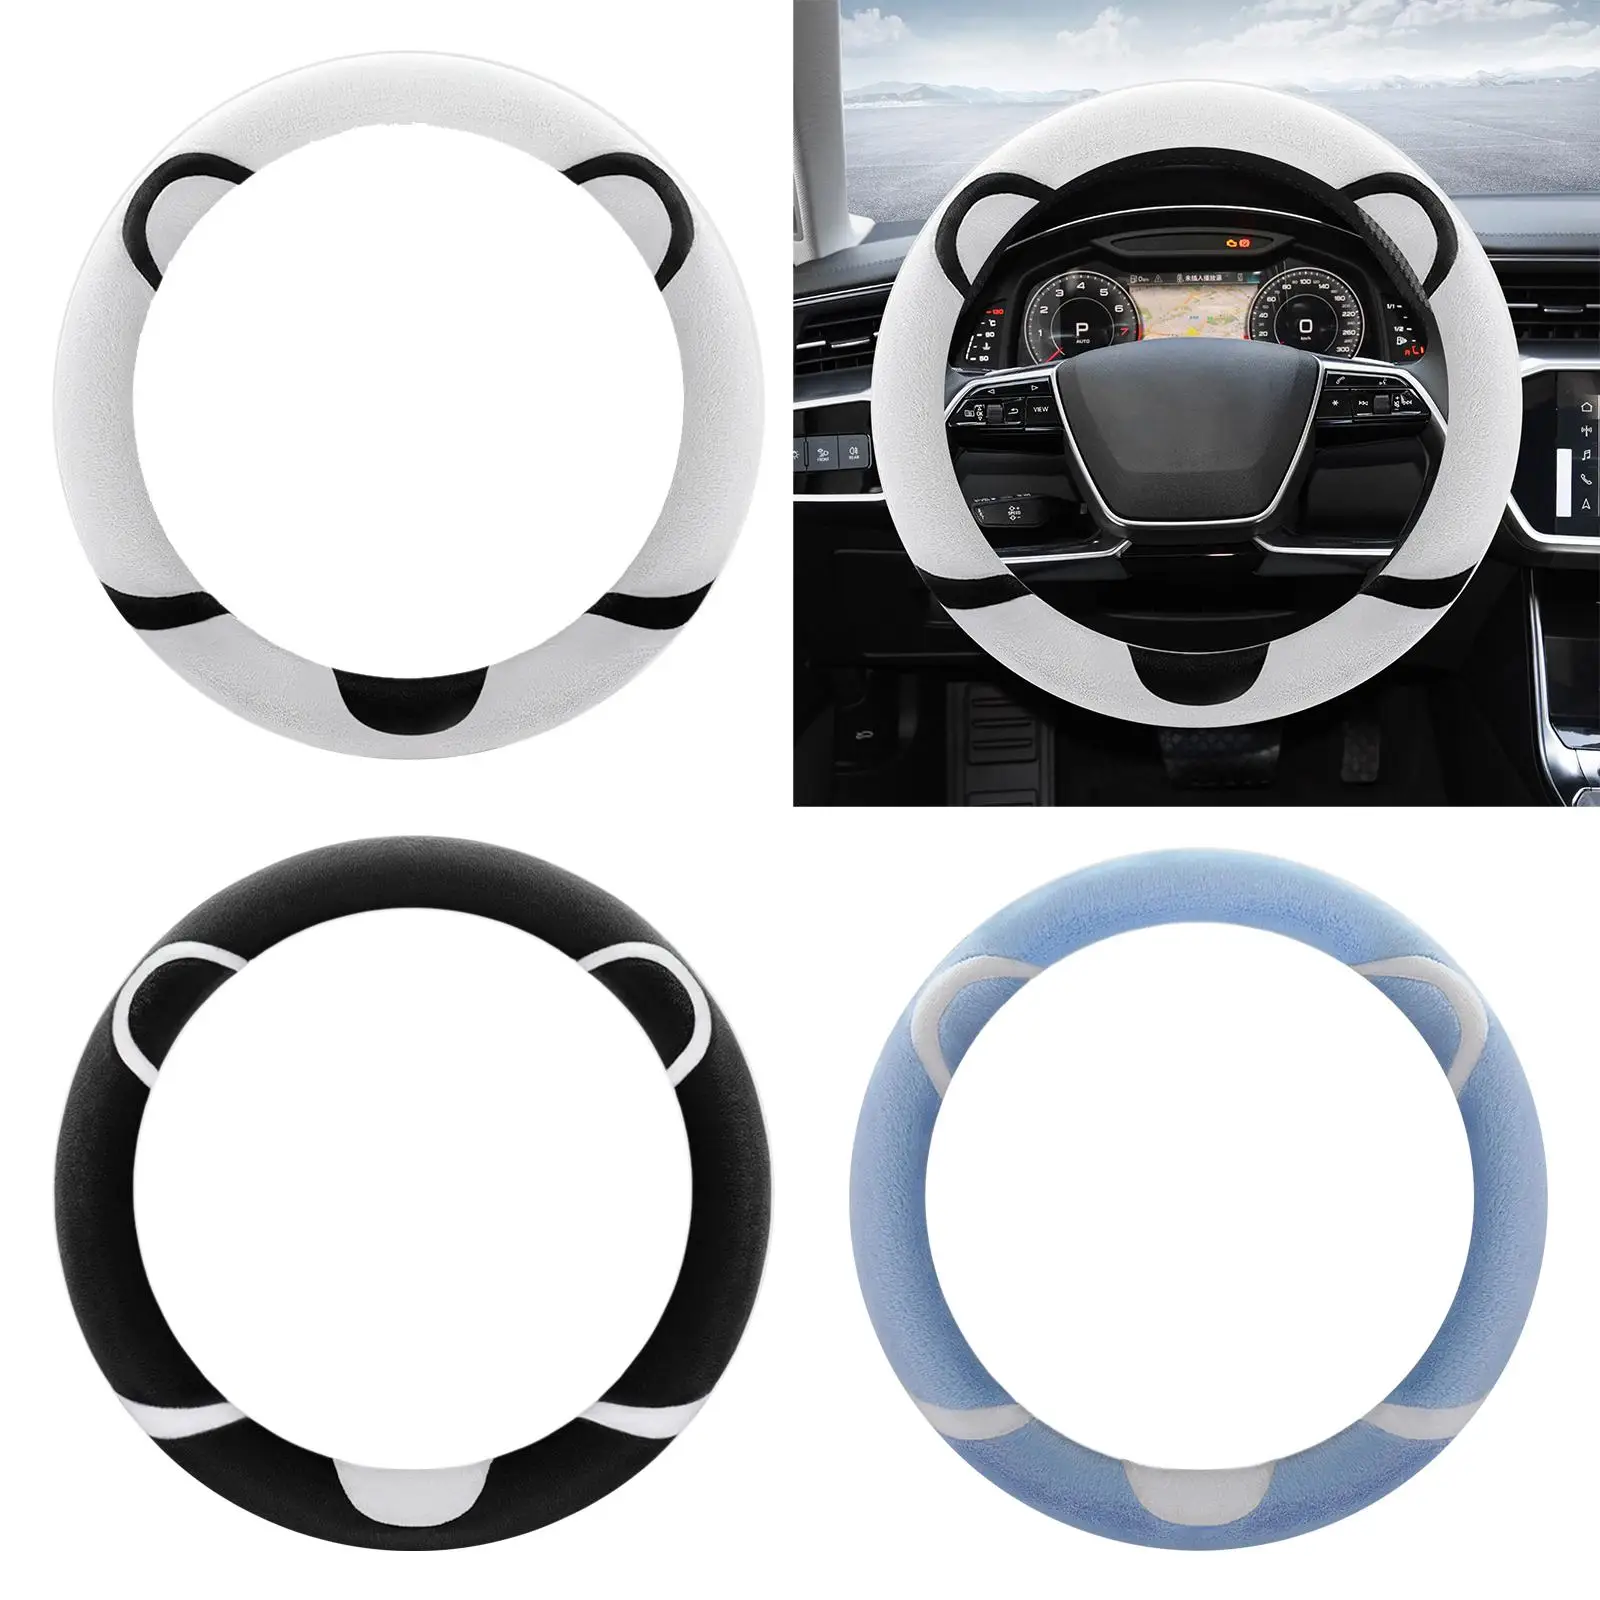 Car Steering Wheel Cover Anti Slip Interior Decoration Wear Resistant Auto Accessories Protection Protector Cover Sleeve